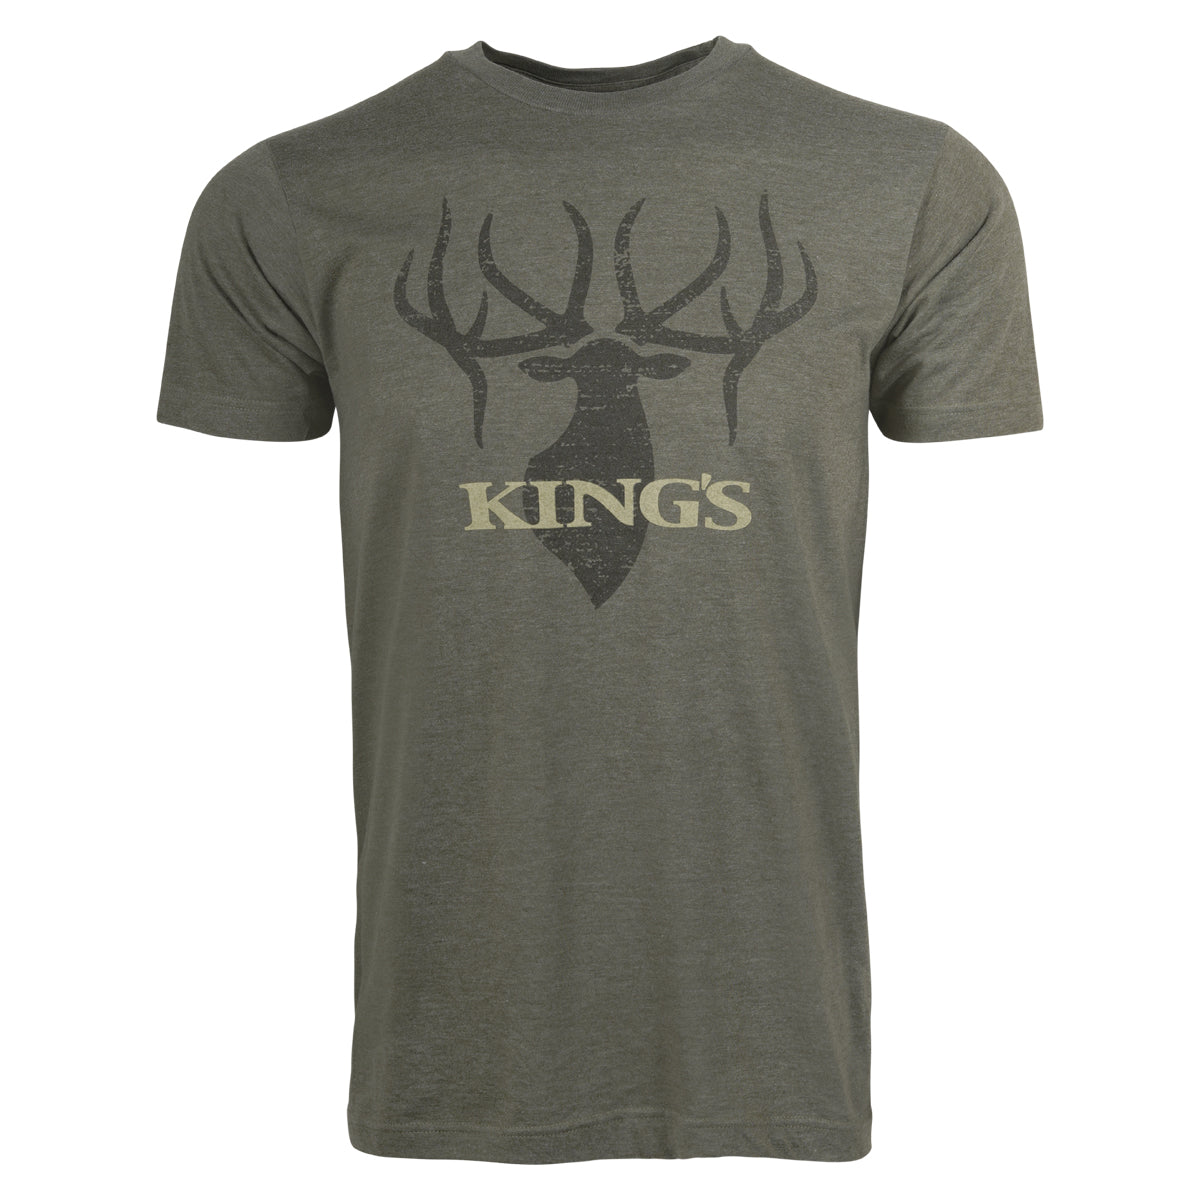 King's Classic Logo Tee in  by GOHUNT | King's - GOHUNT Shop